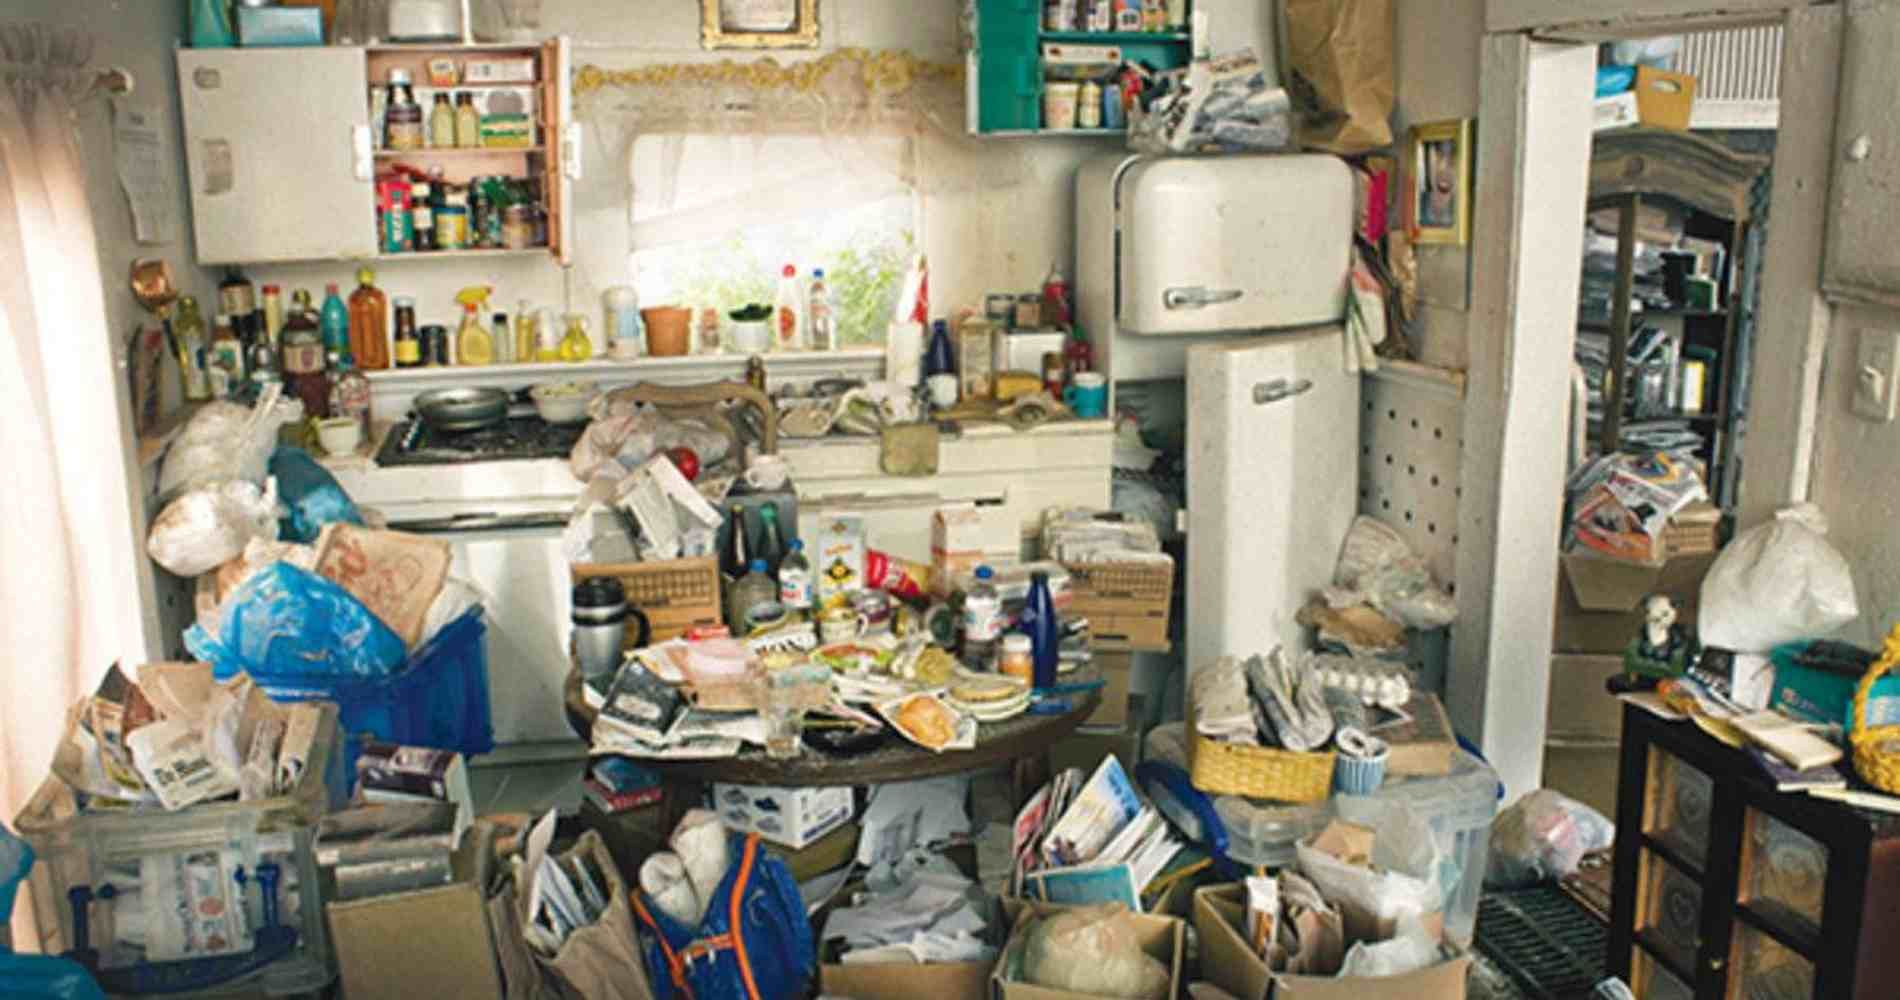 #1 for Hoarding Cleanup in Florence, AZ with Over 1200 5-Star Reviews!